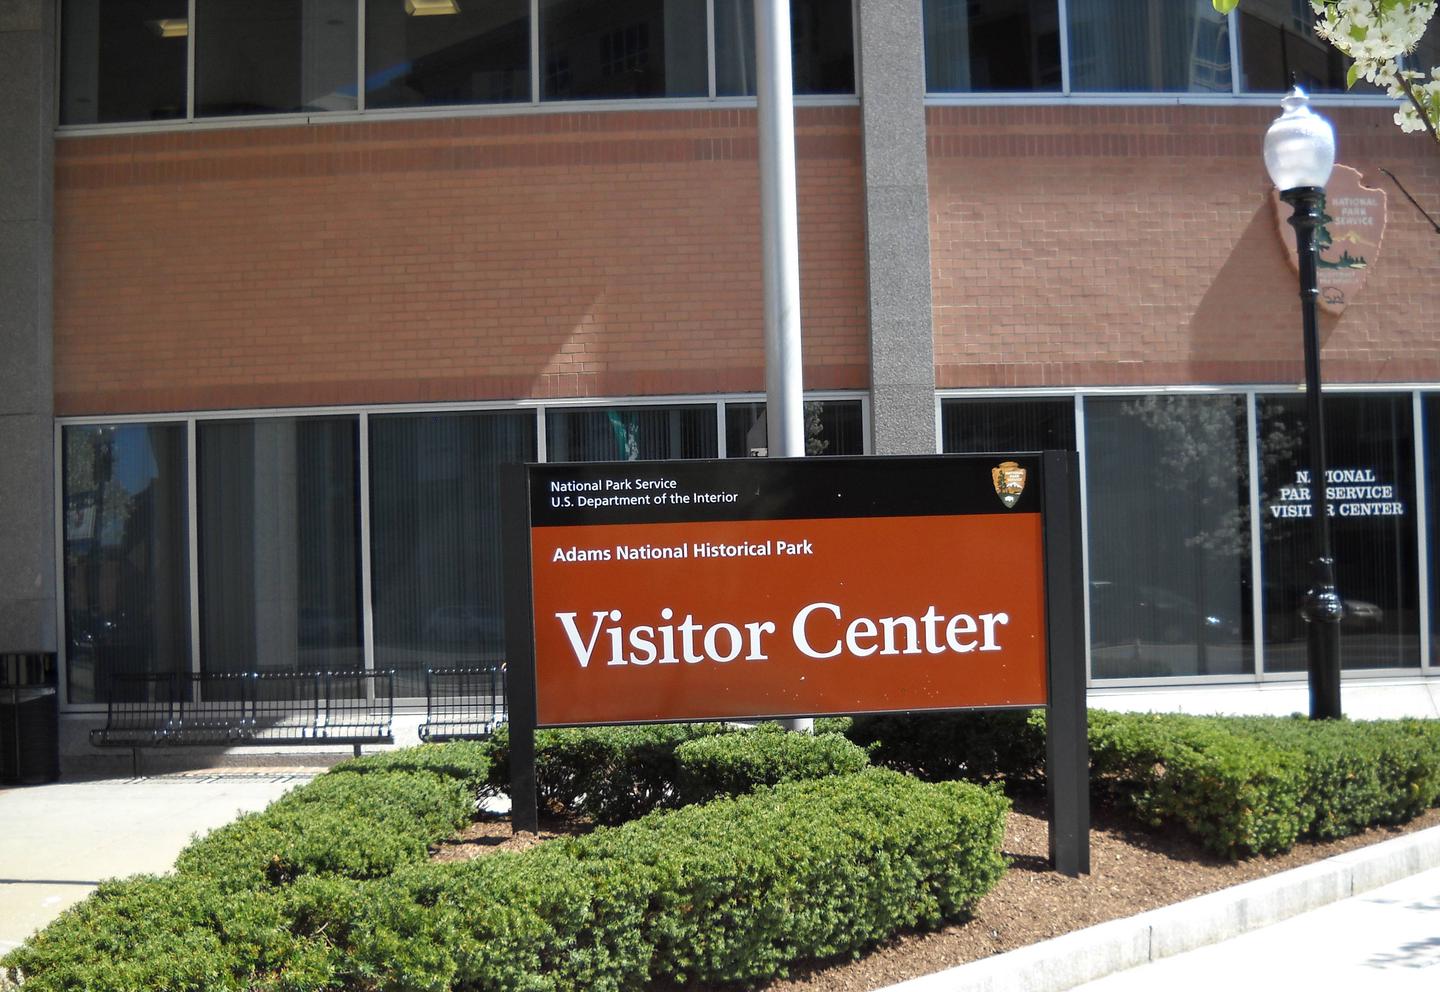 A dark orange sign with white text reads "Adams National Historical Park - Visitor Center." Planted around the sign are small green shrubs. There is a modern building with tall windows and a tall black lamp post behind the sign. The Adams National Historical Park Visitor Center Sign